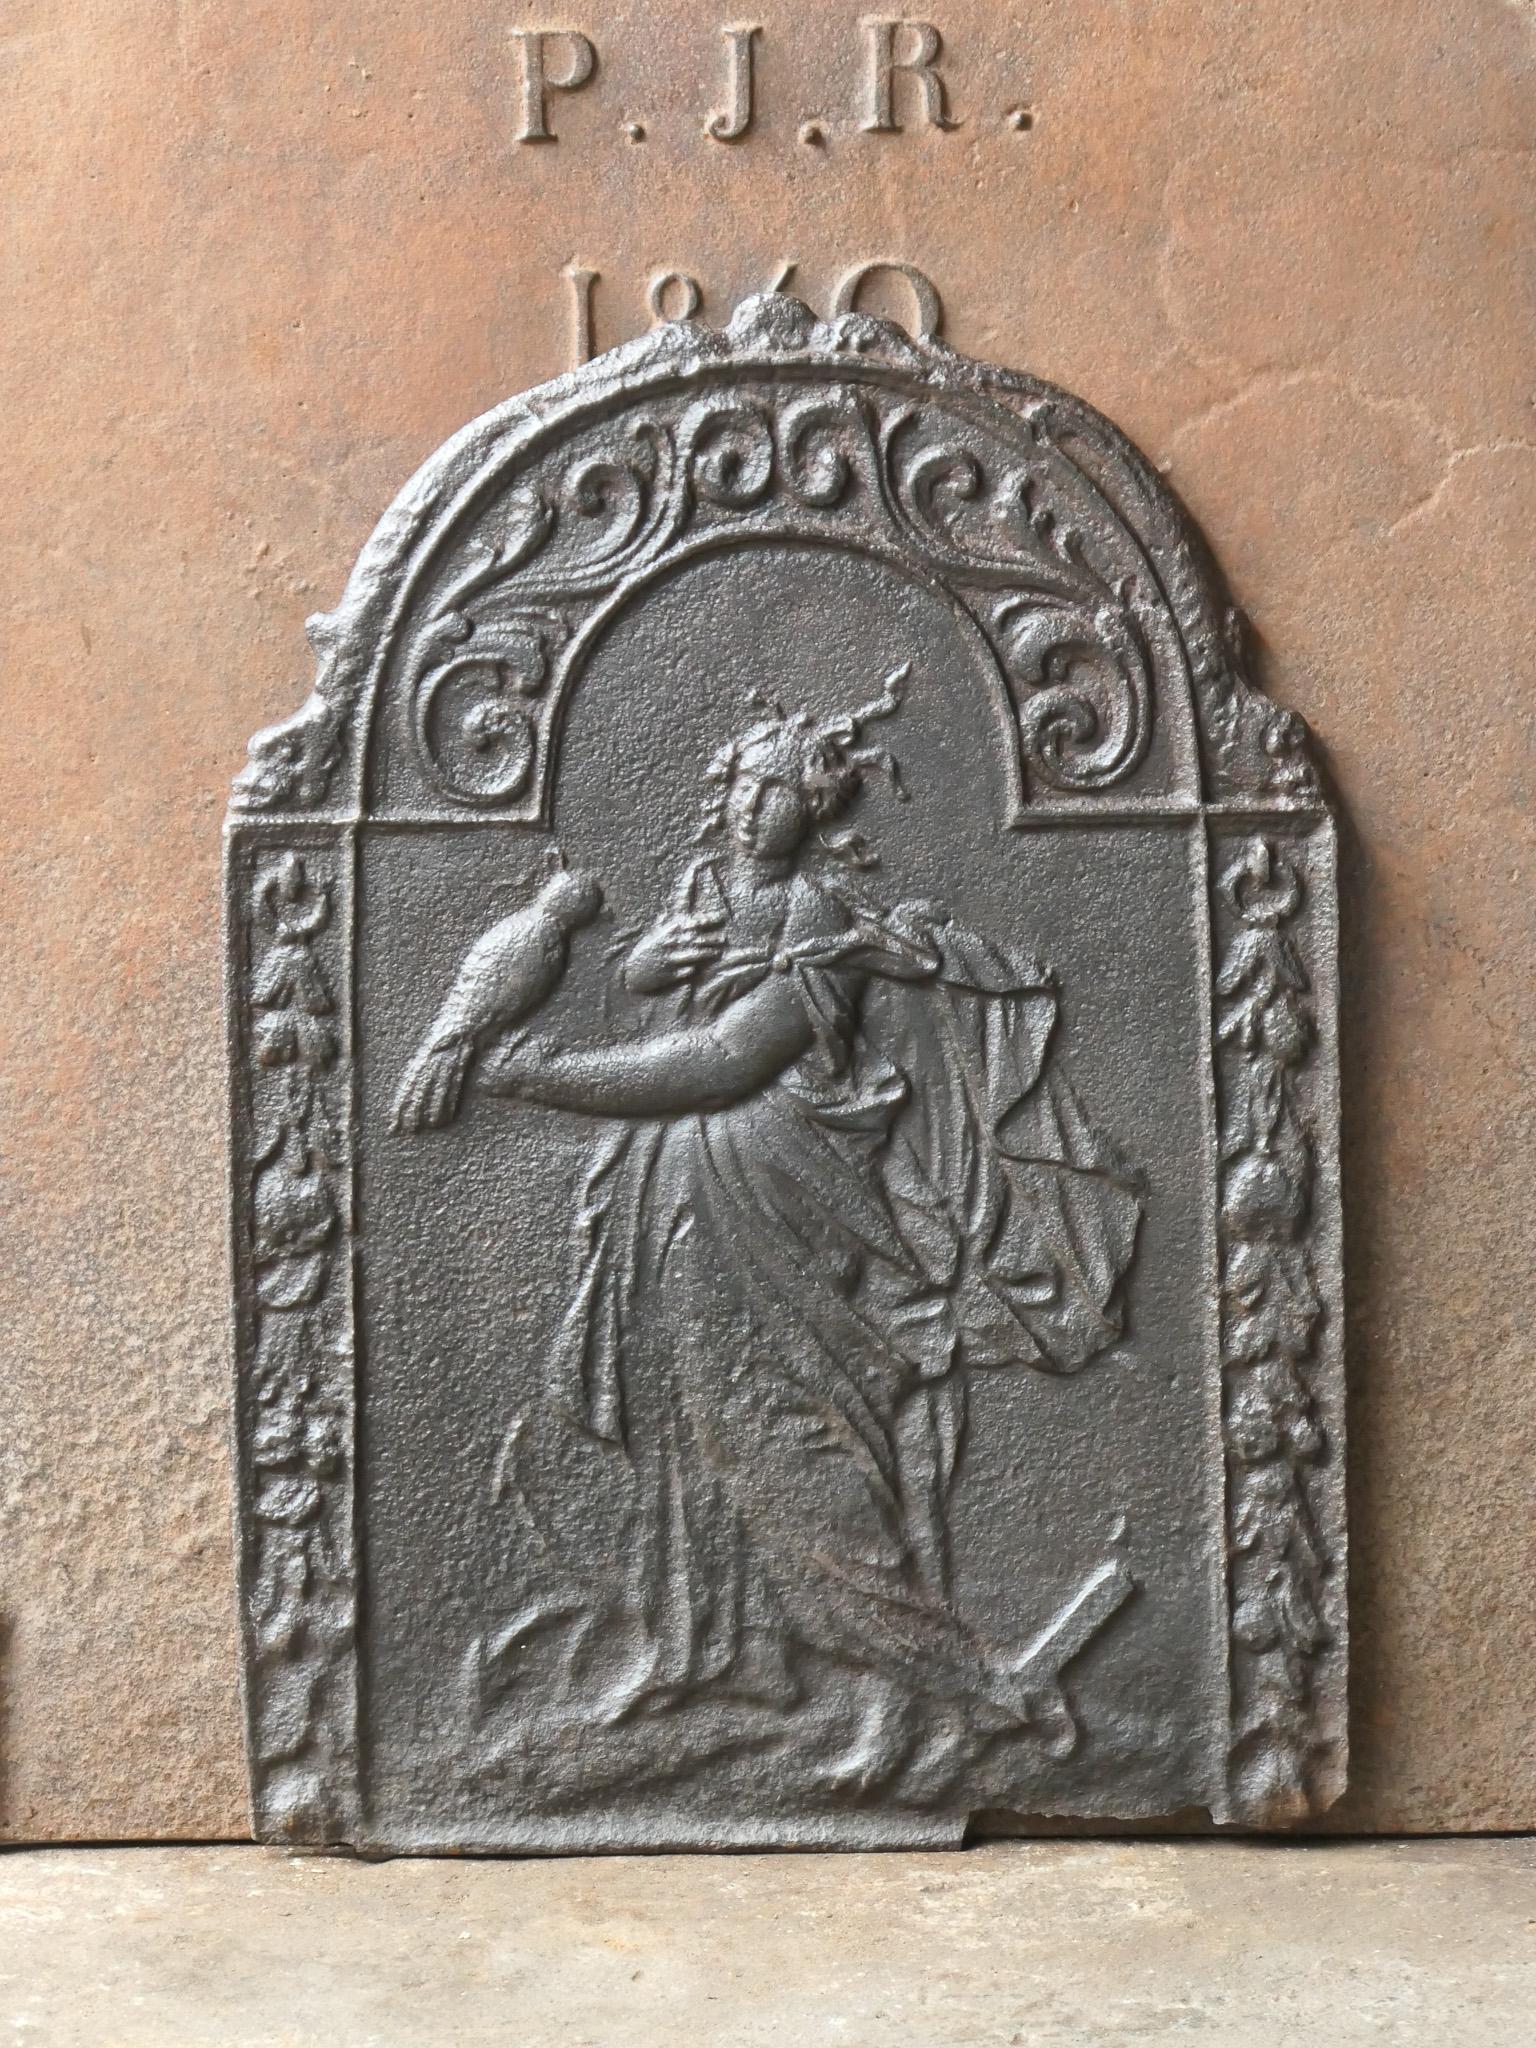 Beautiful 17th century Dutch fireback with an allegory of Hope. The fireback is from the Louis XIV period. Hope from the triptych faith, hope and love, the three theological virtues). The fireback has a natural brown patina and can be made black /